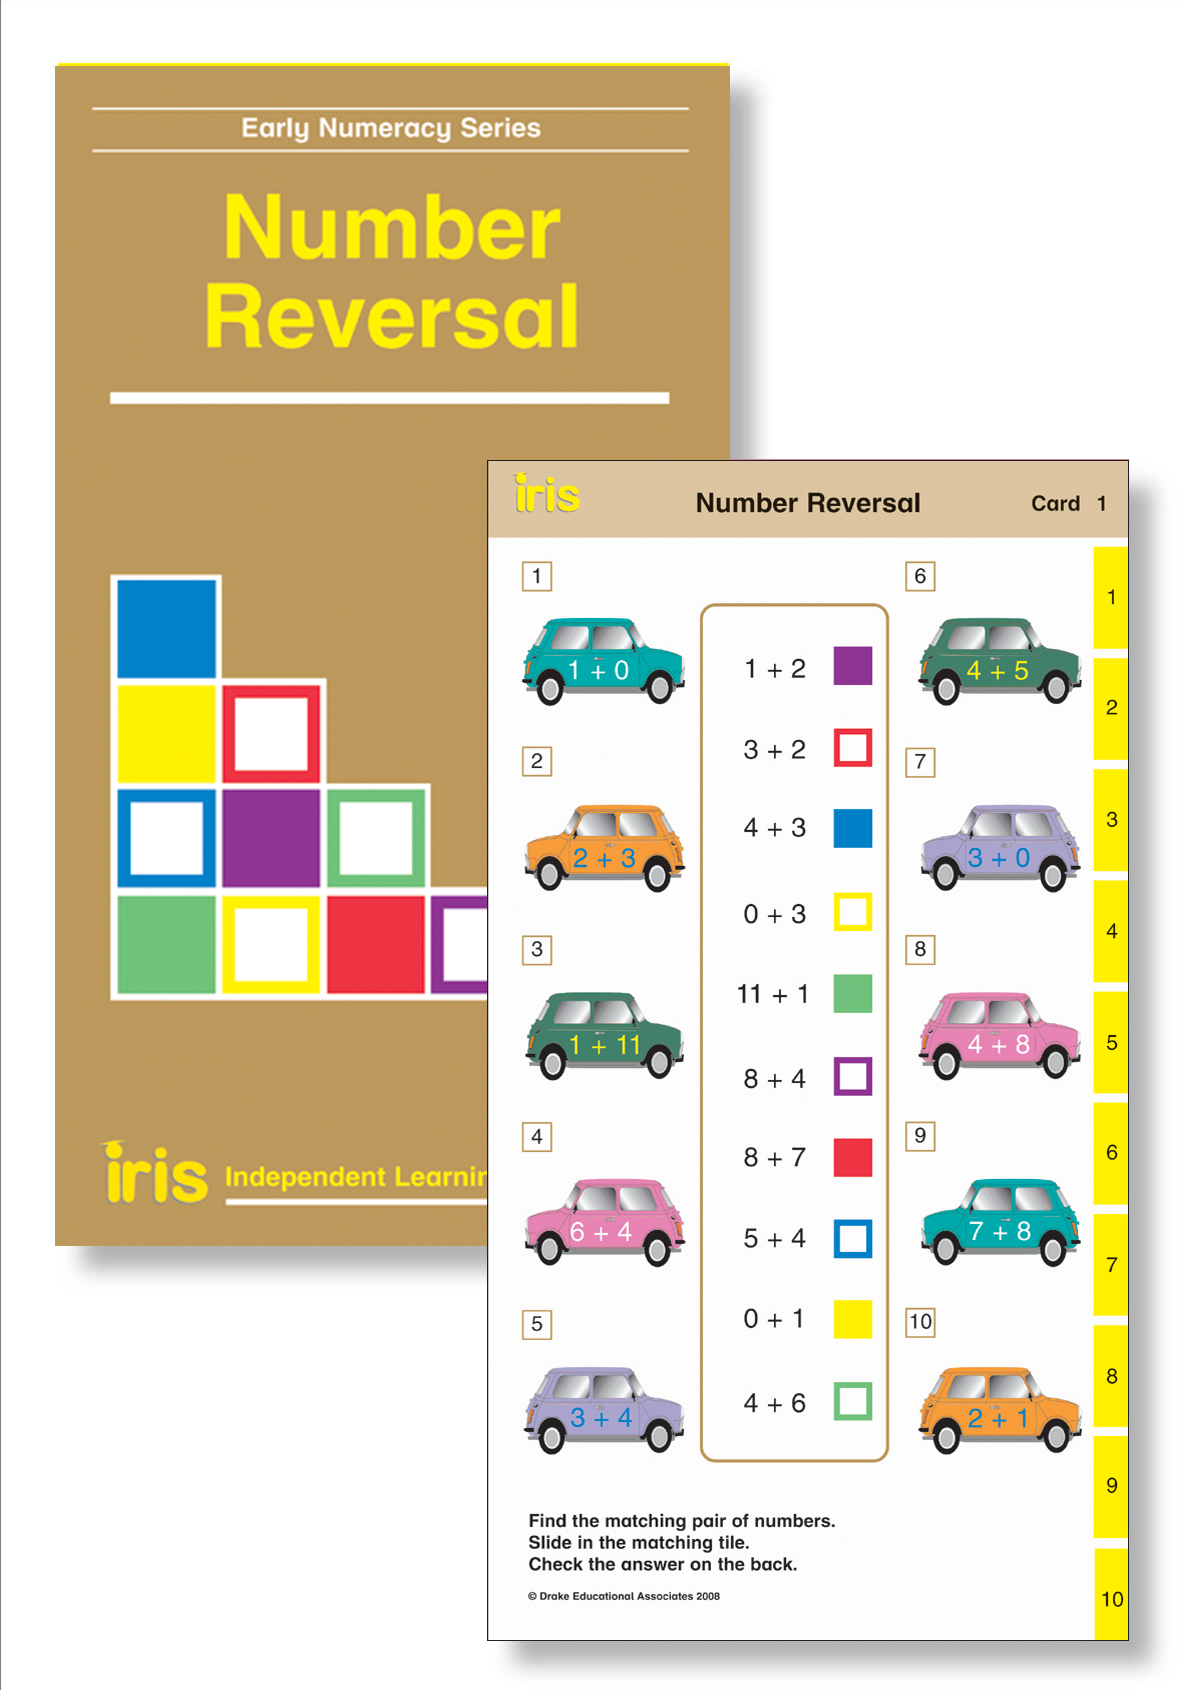 Iris Study Cards: Early Numeracy Year 1 - Number Reversal